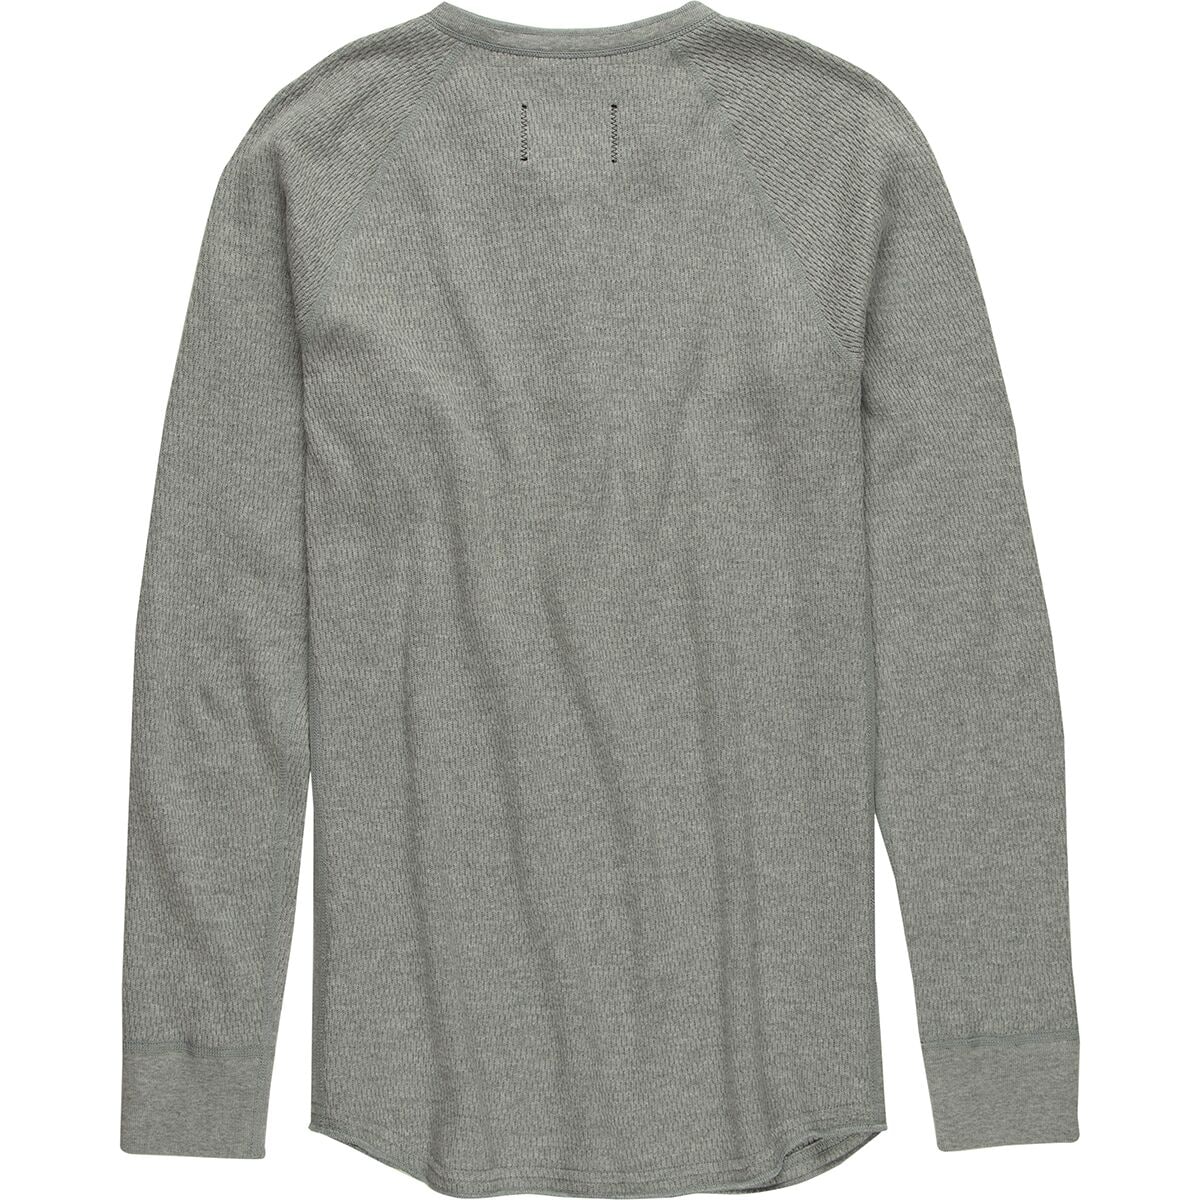 Reigning Champ Honeycomb Thermal Long Sleeve Henley - Men's - Clothing